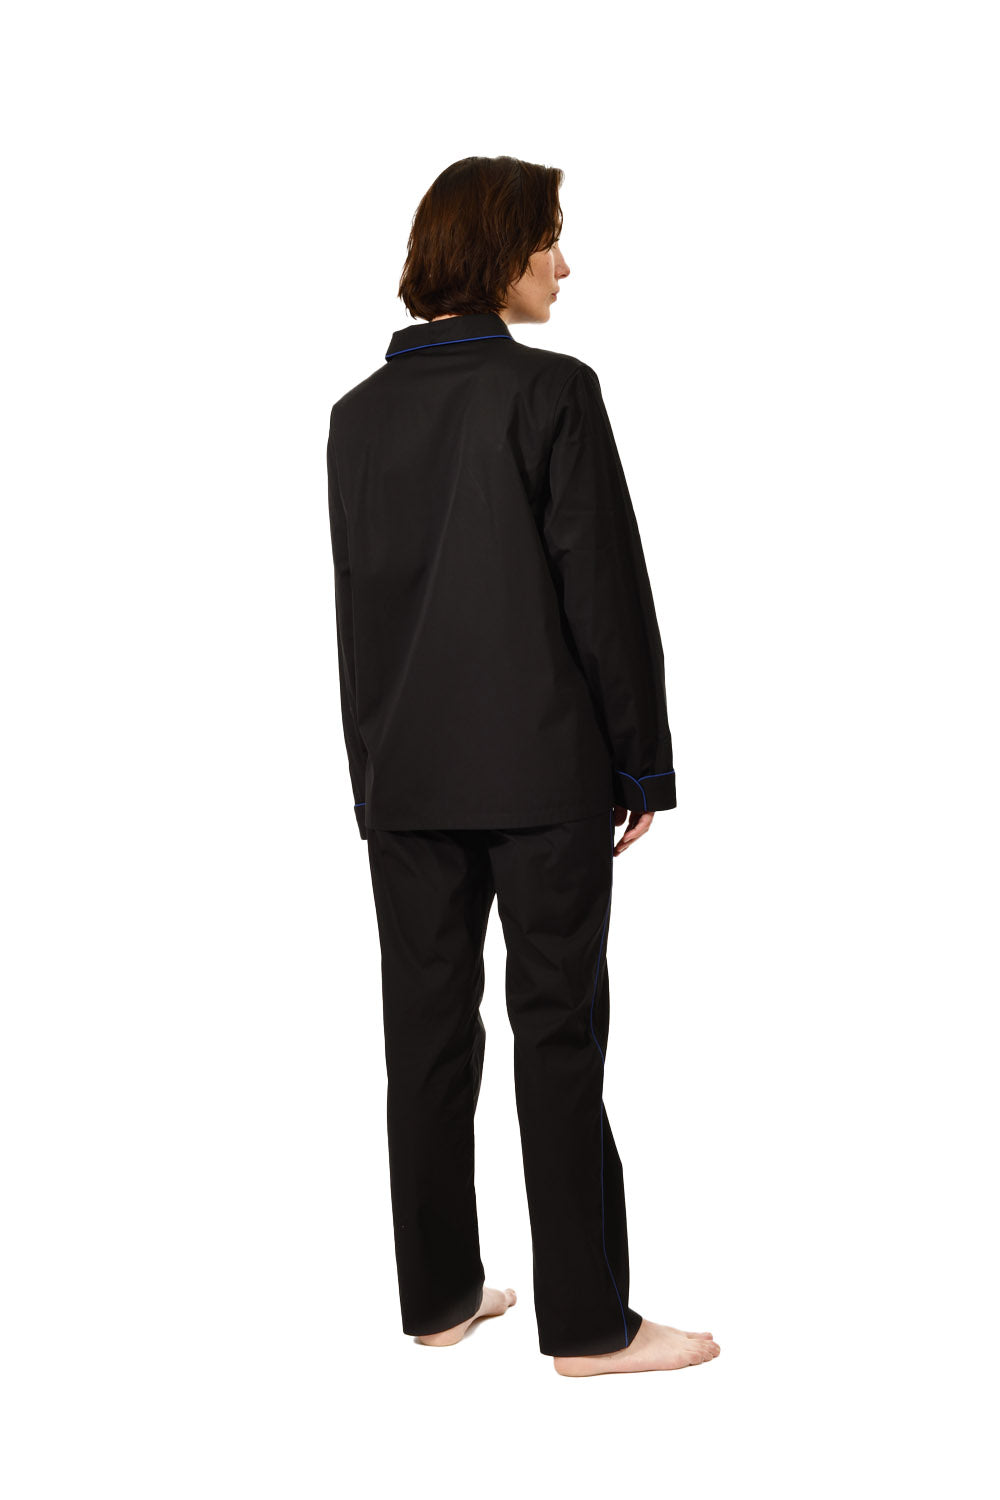 The Waldorf in black cotton broadcloth